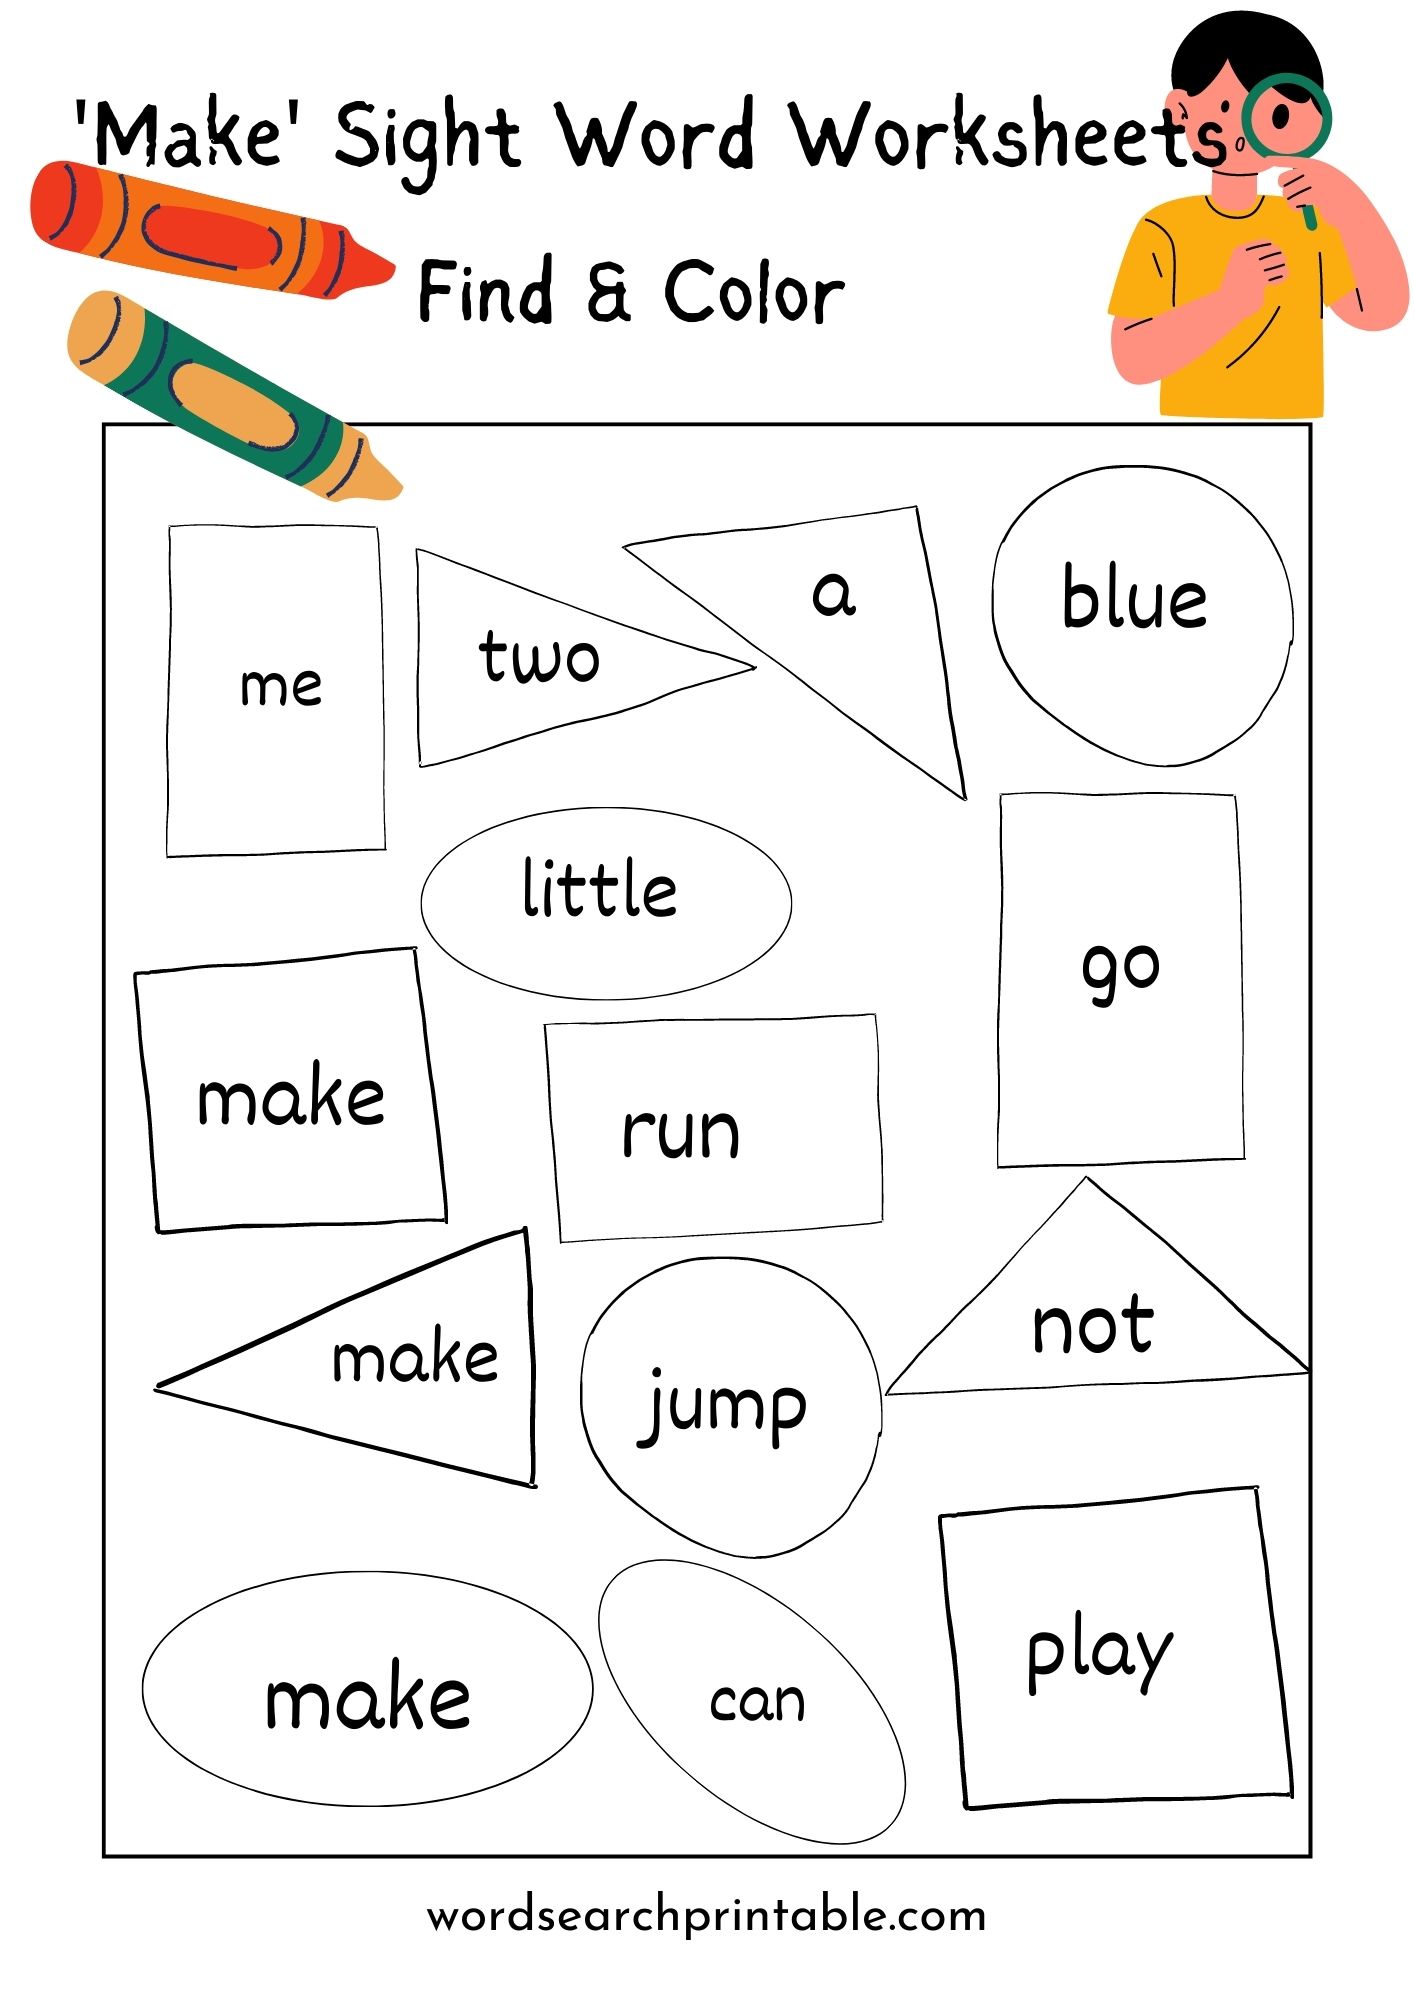 Find sight word Make and Color the geometric shape